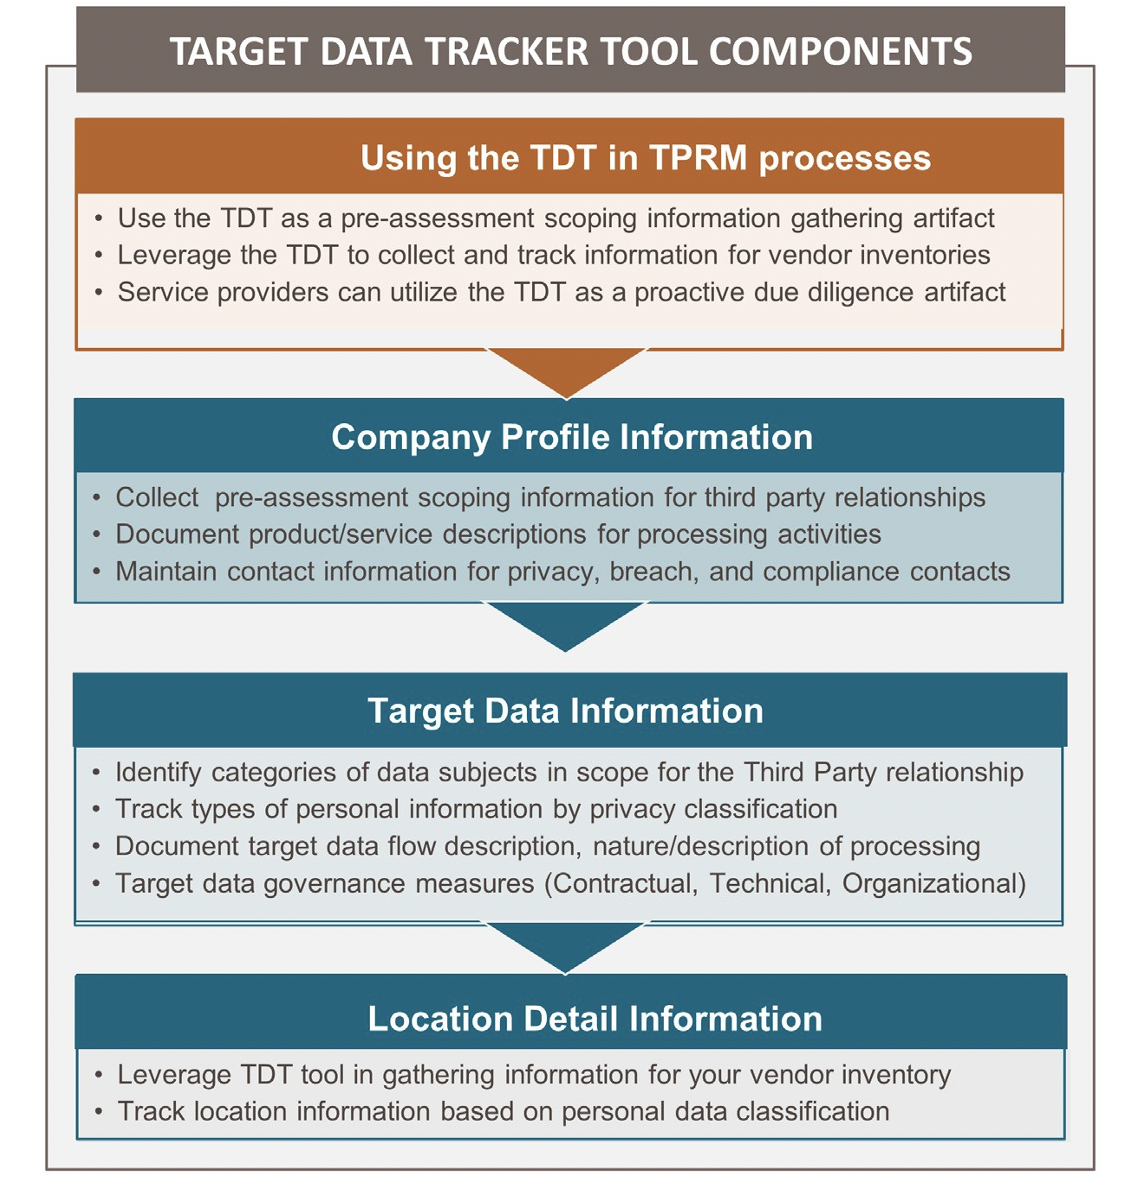 Data Privacy Day 2021: Target Data Tracker Tool Components